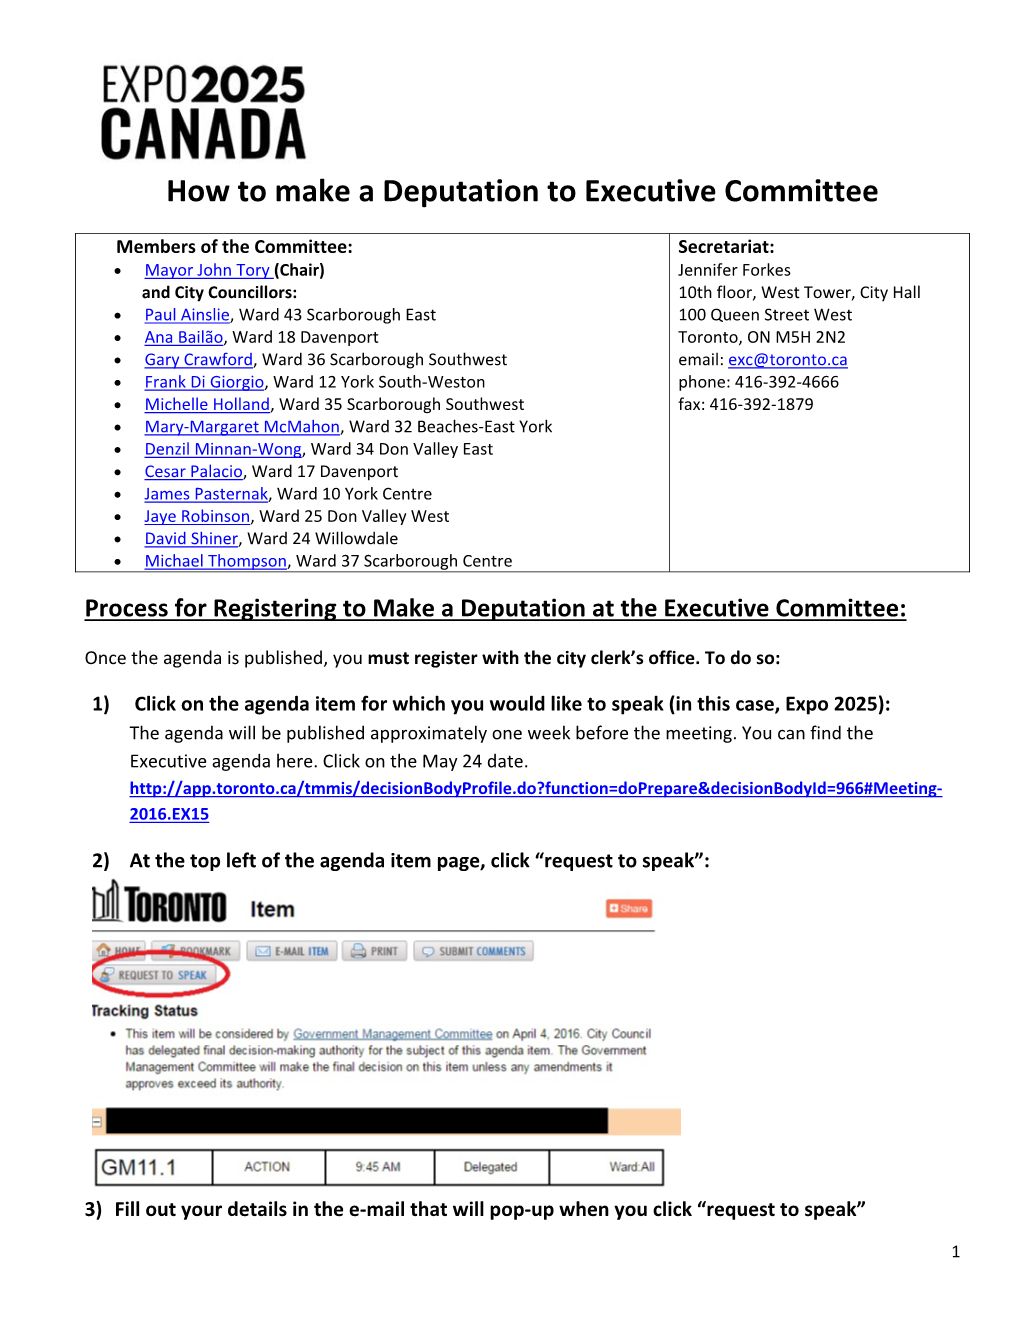 How to Make a Deputation to Executive Committee